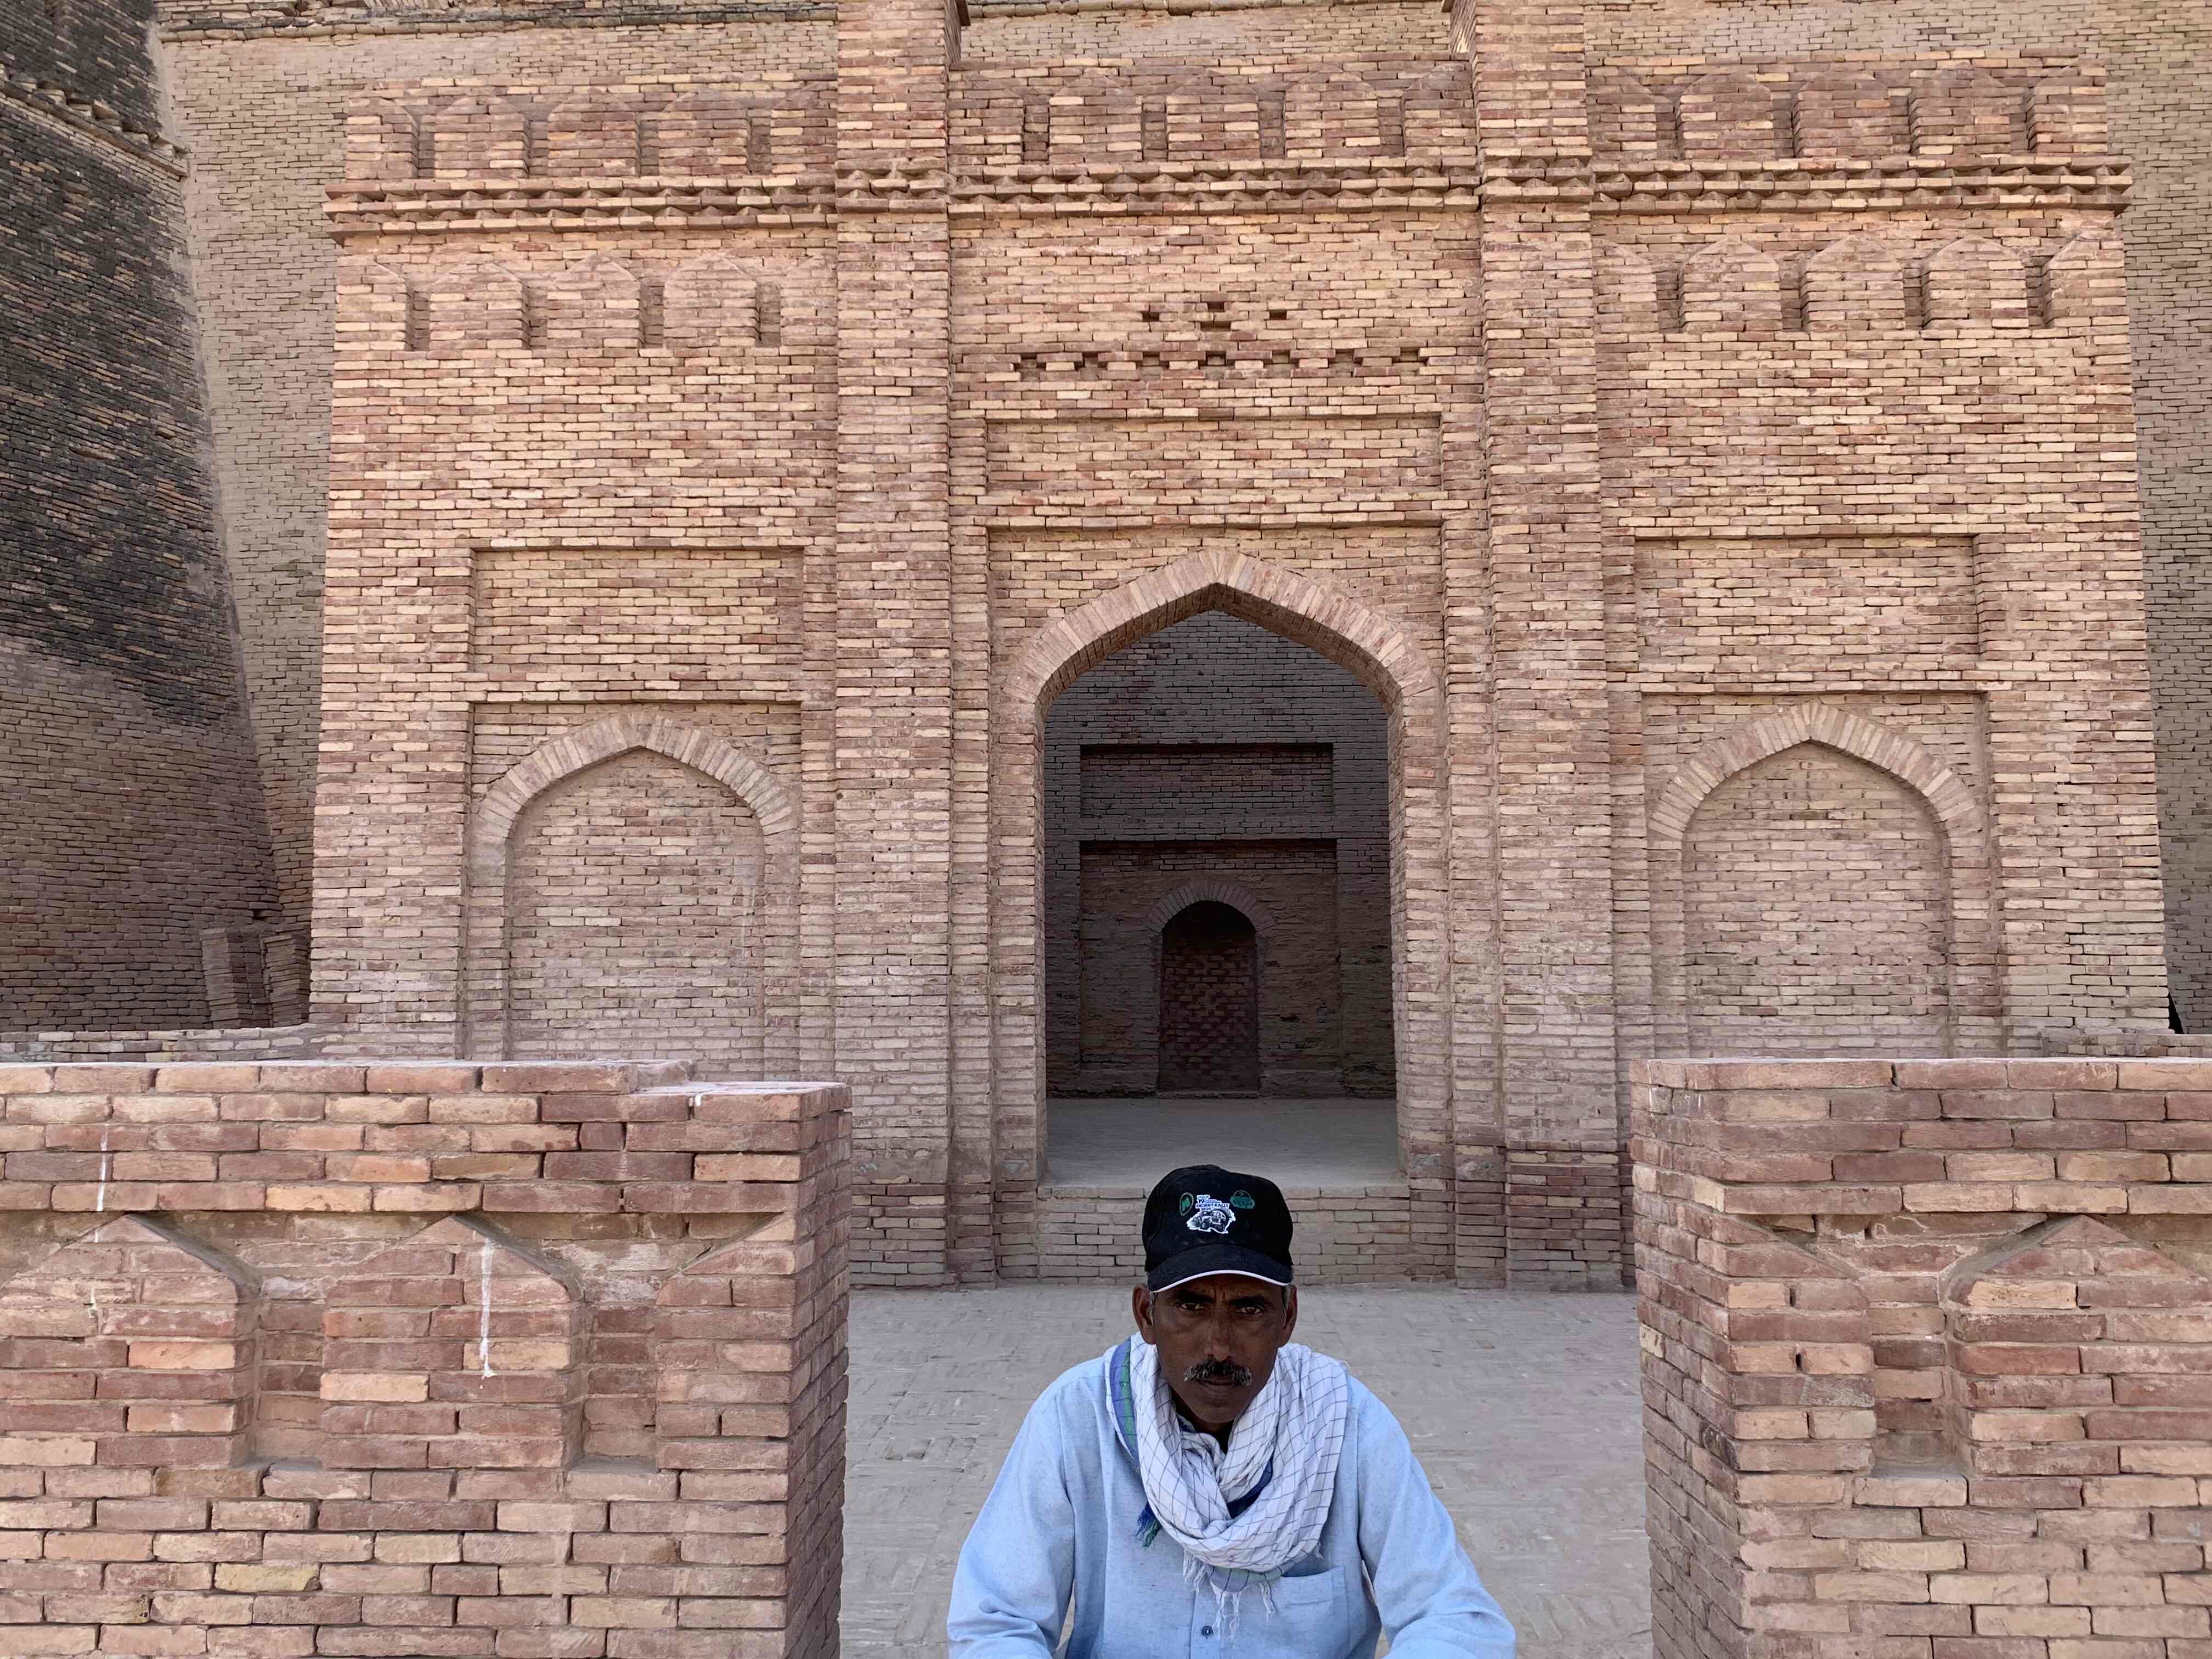 Feature Naveed, one of the residents whose house I visited. His picture is captured outside the Derawar Fort mosque.